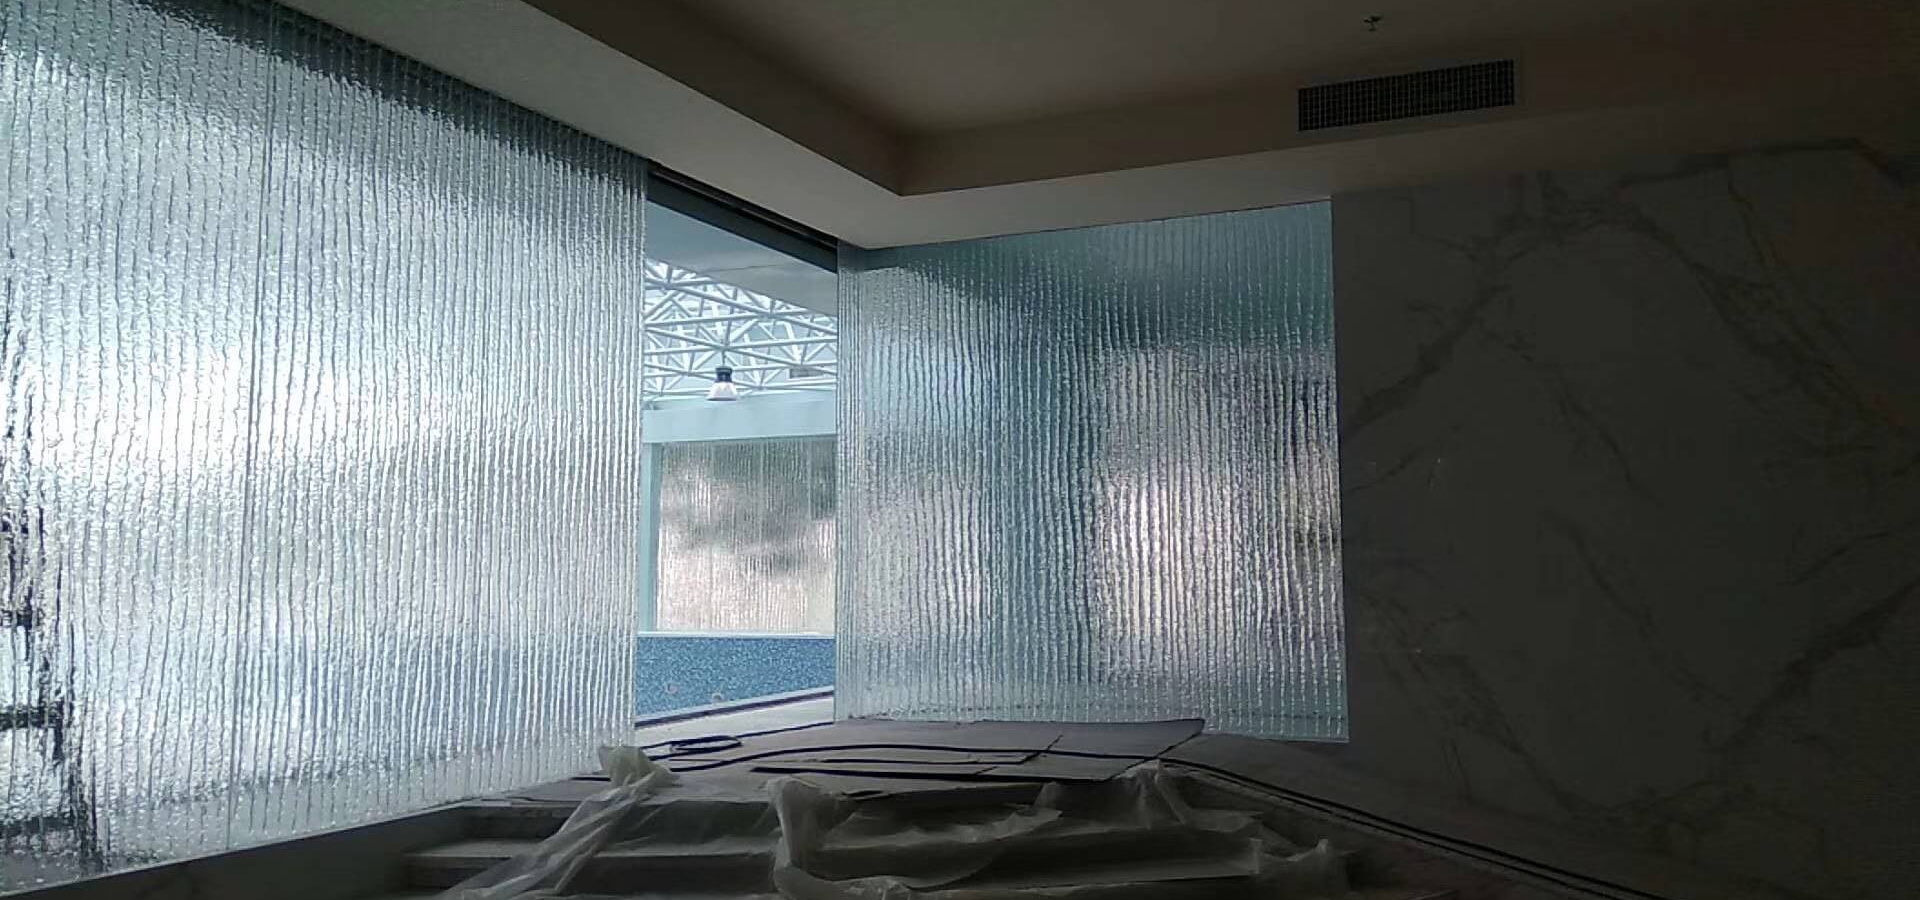 The glass wall partition of the swimming pool